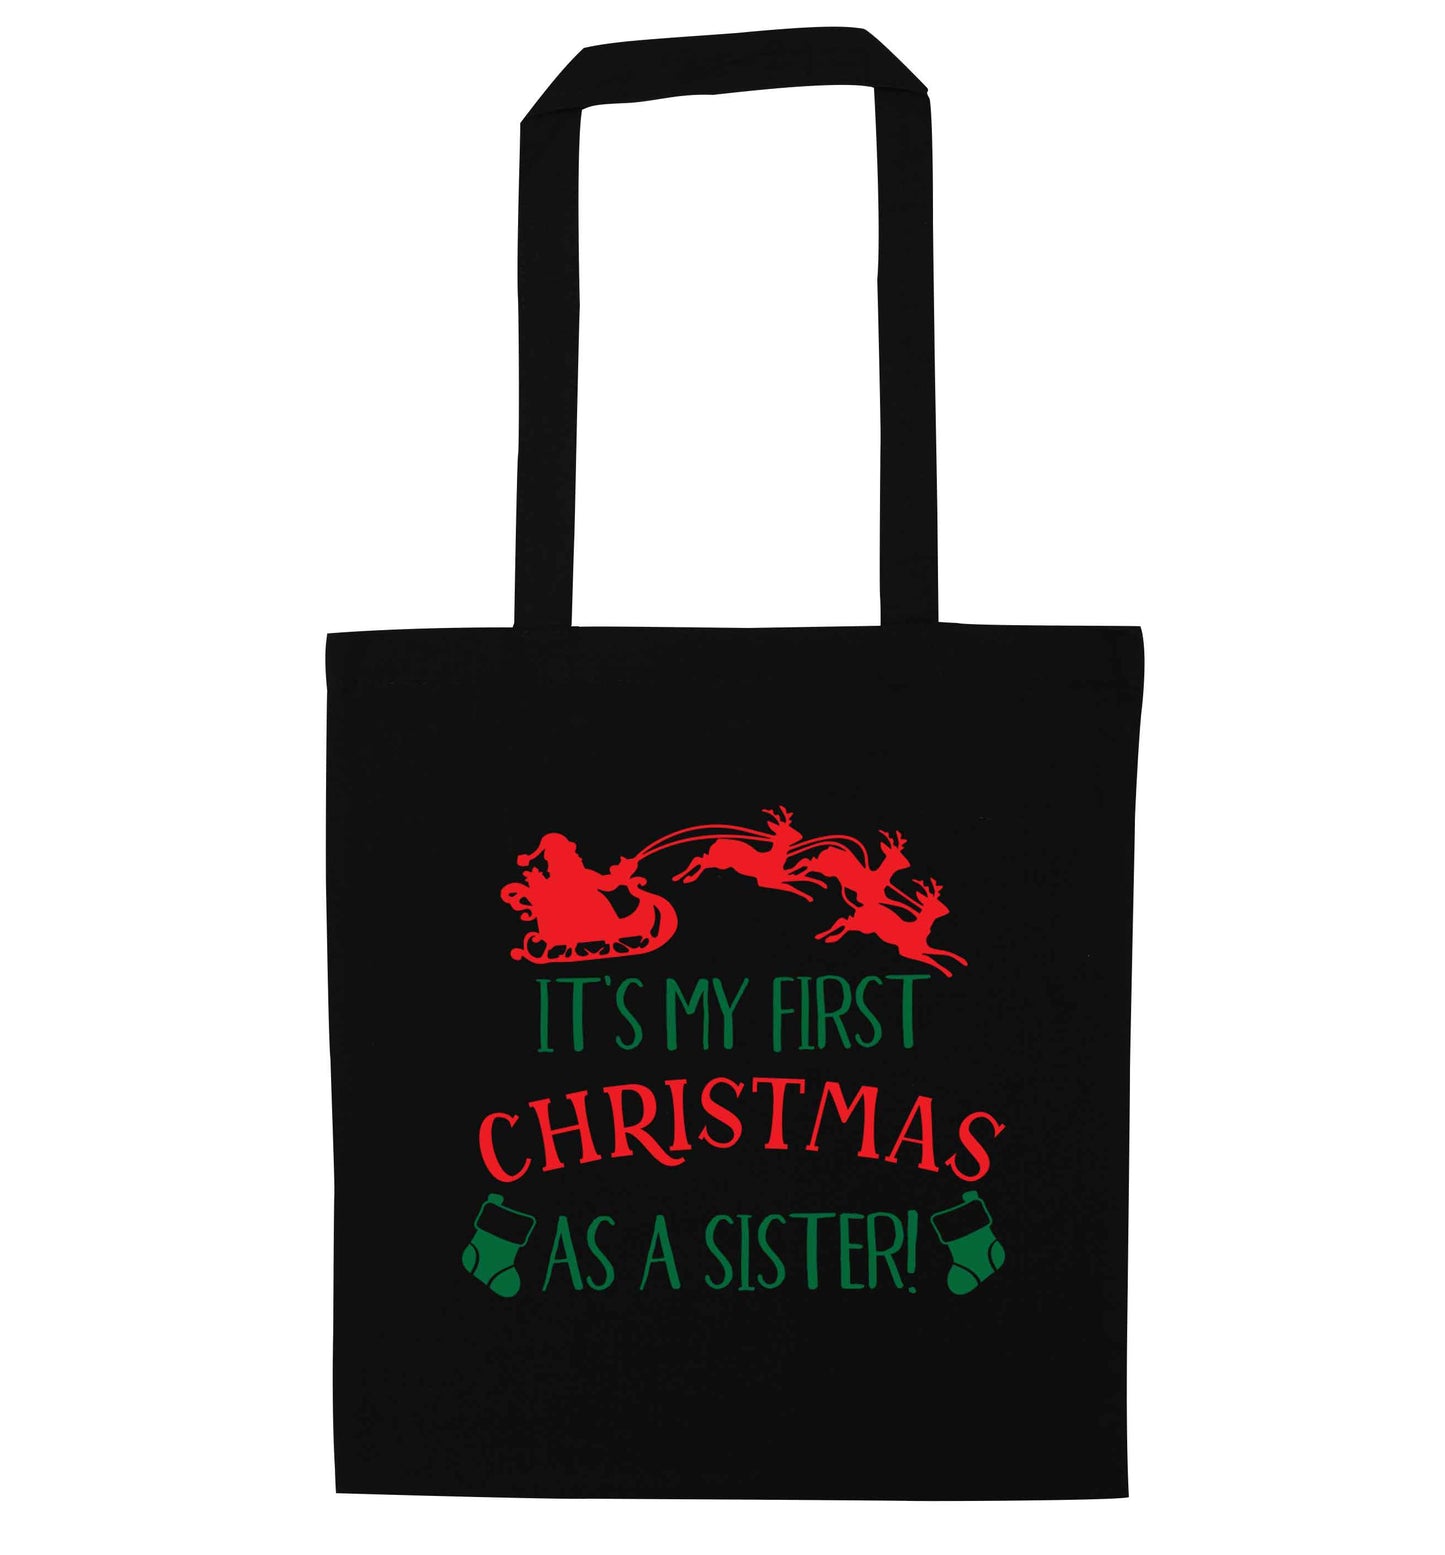 It's my first Christmas as a sister! black tote bag